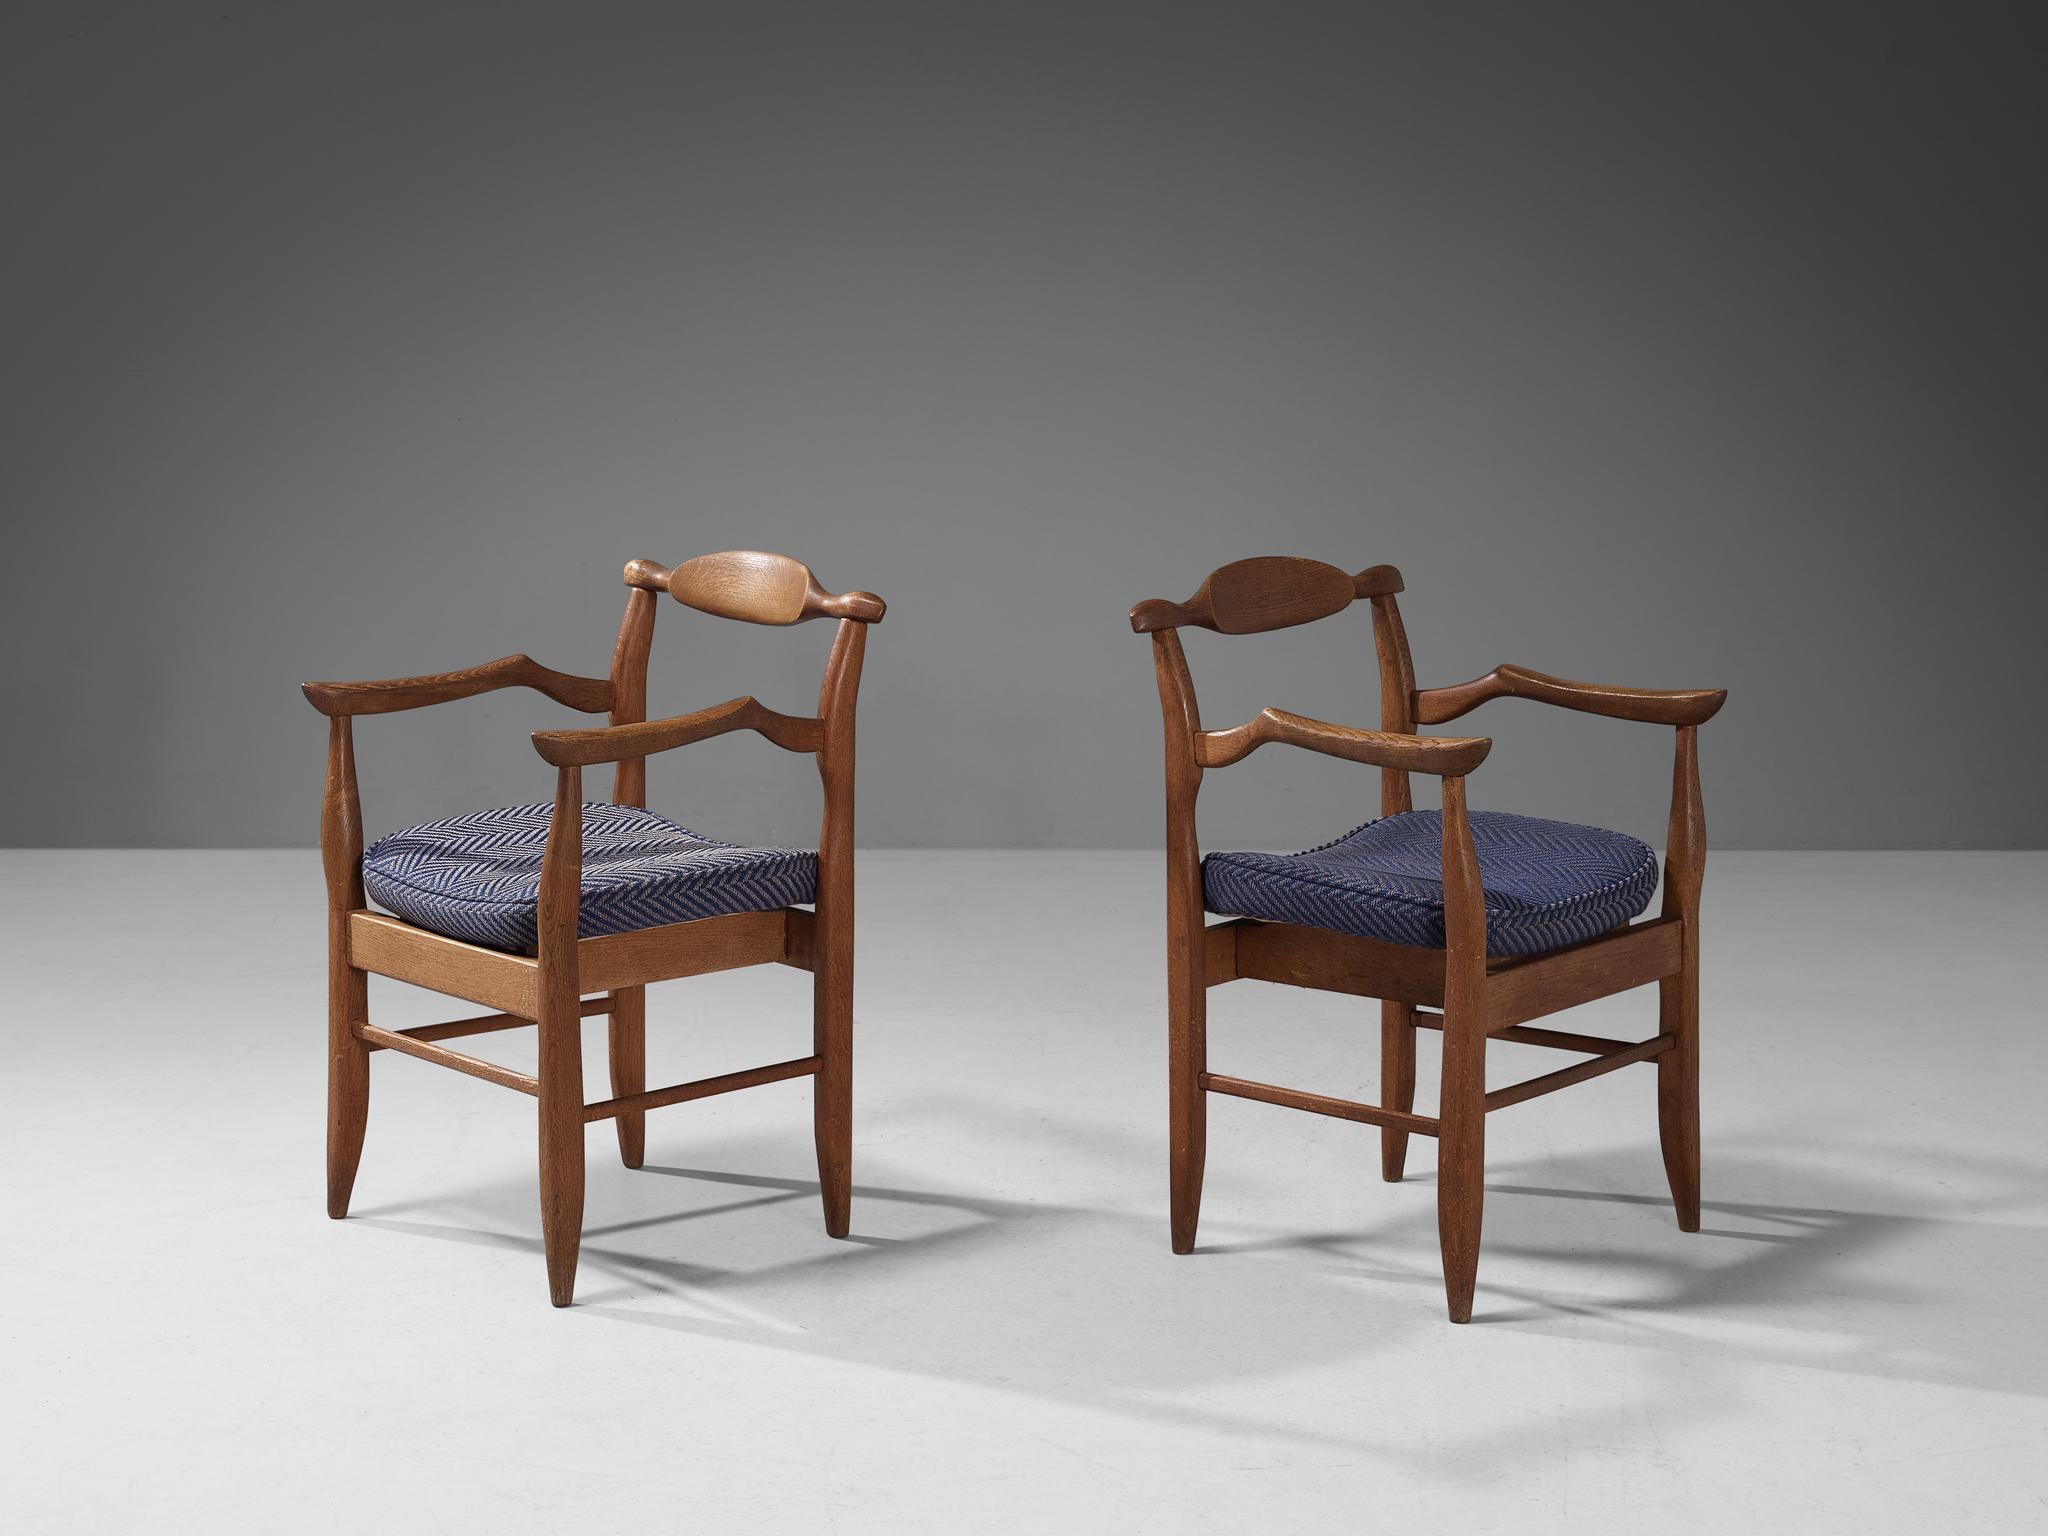 Guillerme et Chambron, pair of armchairs model 'Fumay,' oak and fabric, France, 1965.

Beautiful shaped pair of armchairs in blond oak by French designer duo Jacques Chambron and Robert Guillerme. This chair shows beautiful lines in every element.